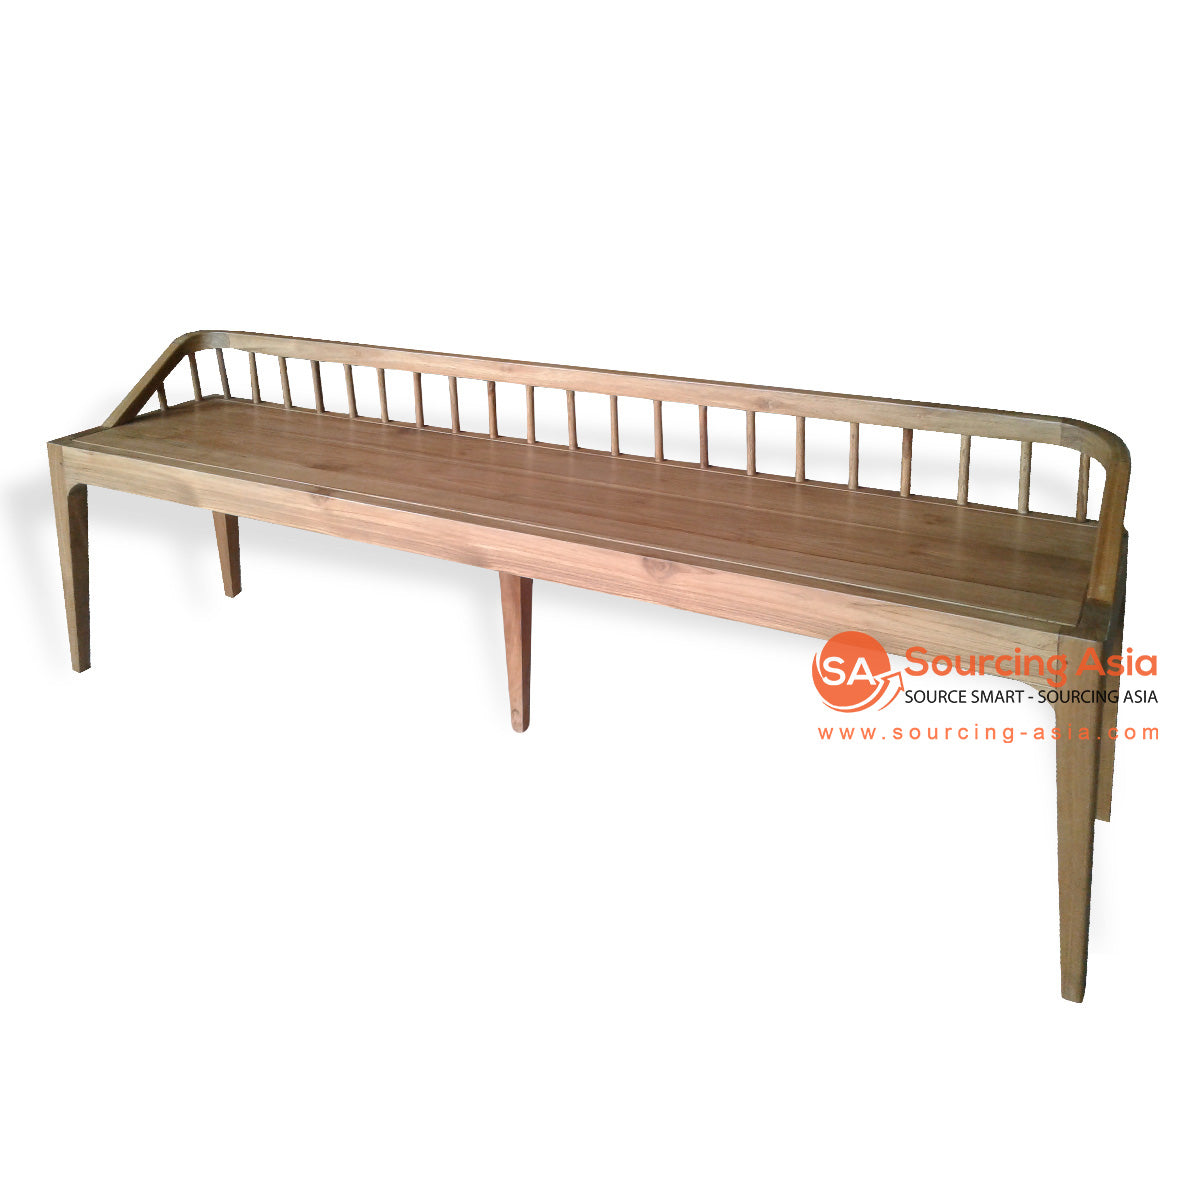 KYT099 NATURAL RECYCLED TEAK WOOD SPINDLE BENCH